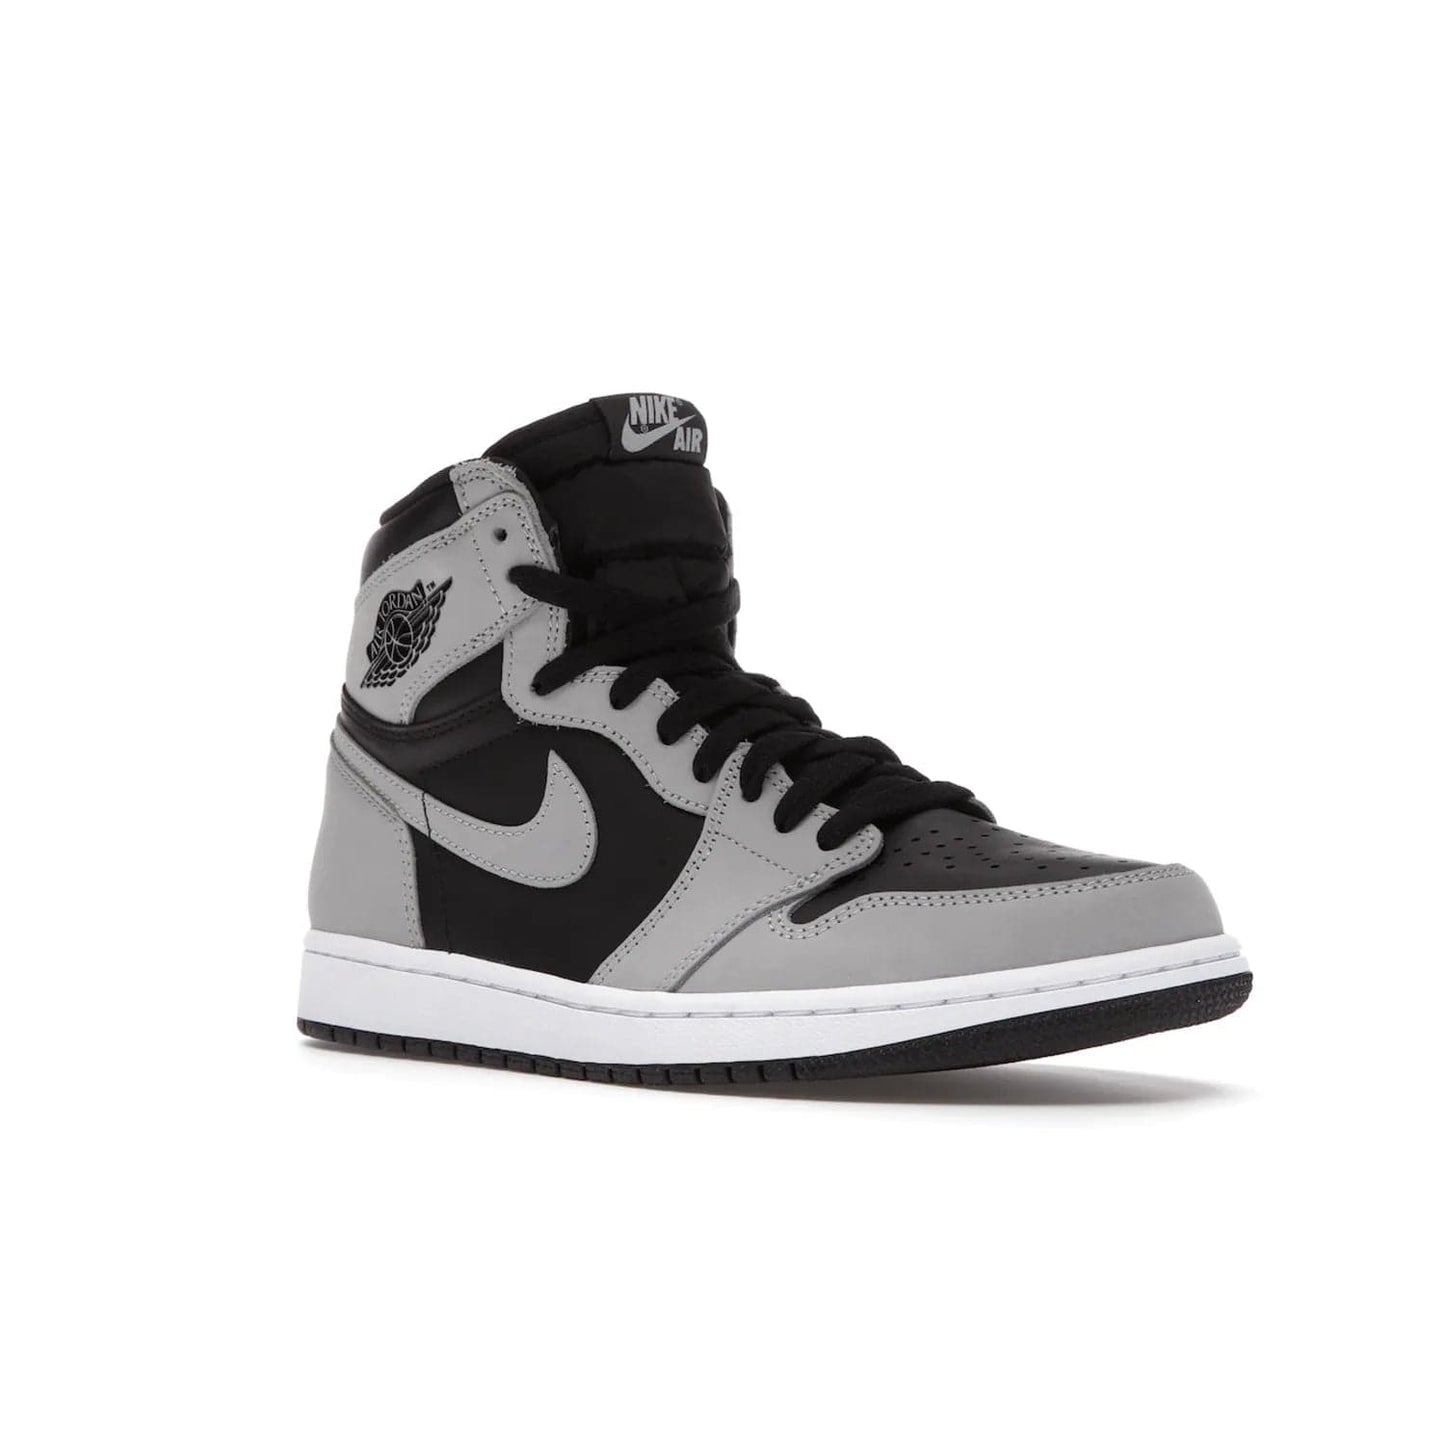 Jordan 1 Retro High Shadow 2.0 - Image 5 - Only at www.BallersClubKickz.com - #
Classic Air Jordan 1 Retro High Shadow 2.0 with black leather base and Light Smoke Grey overlays. Released in May 2021.